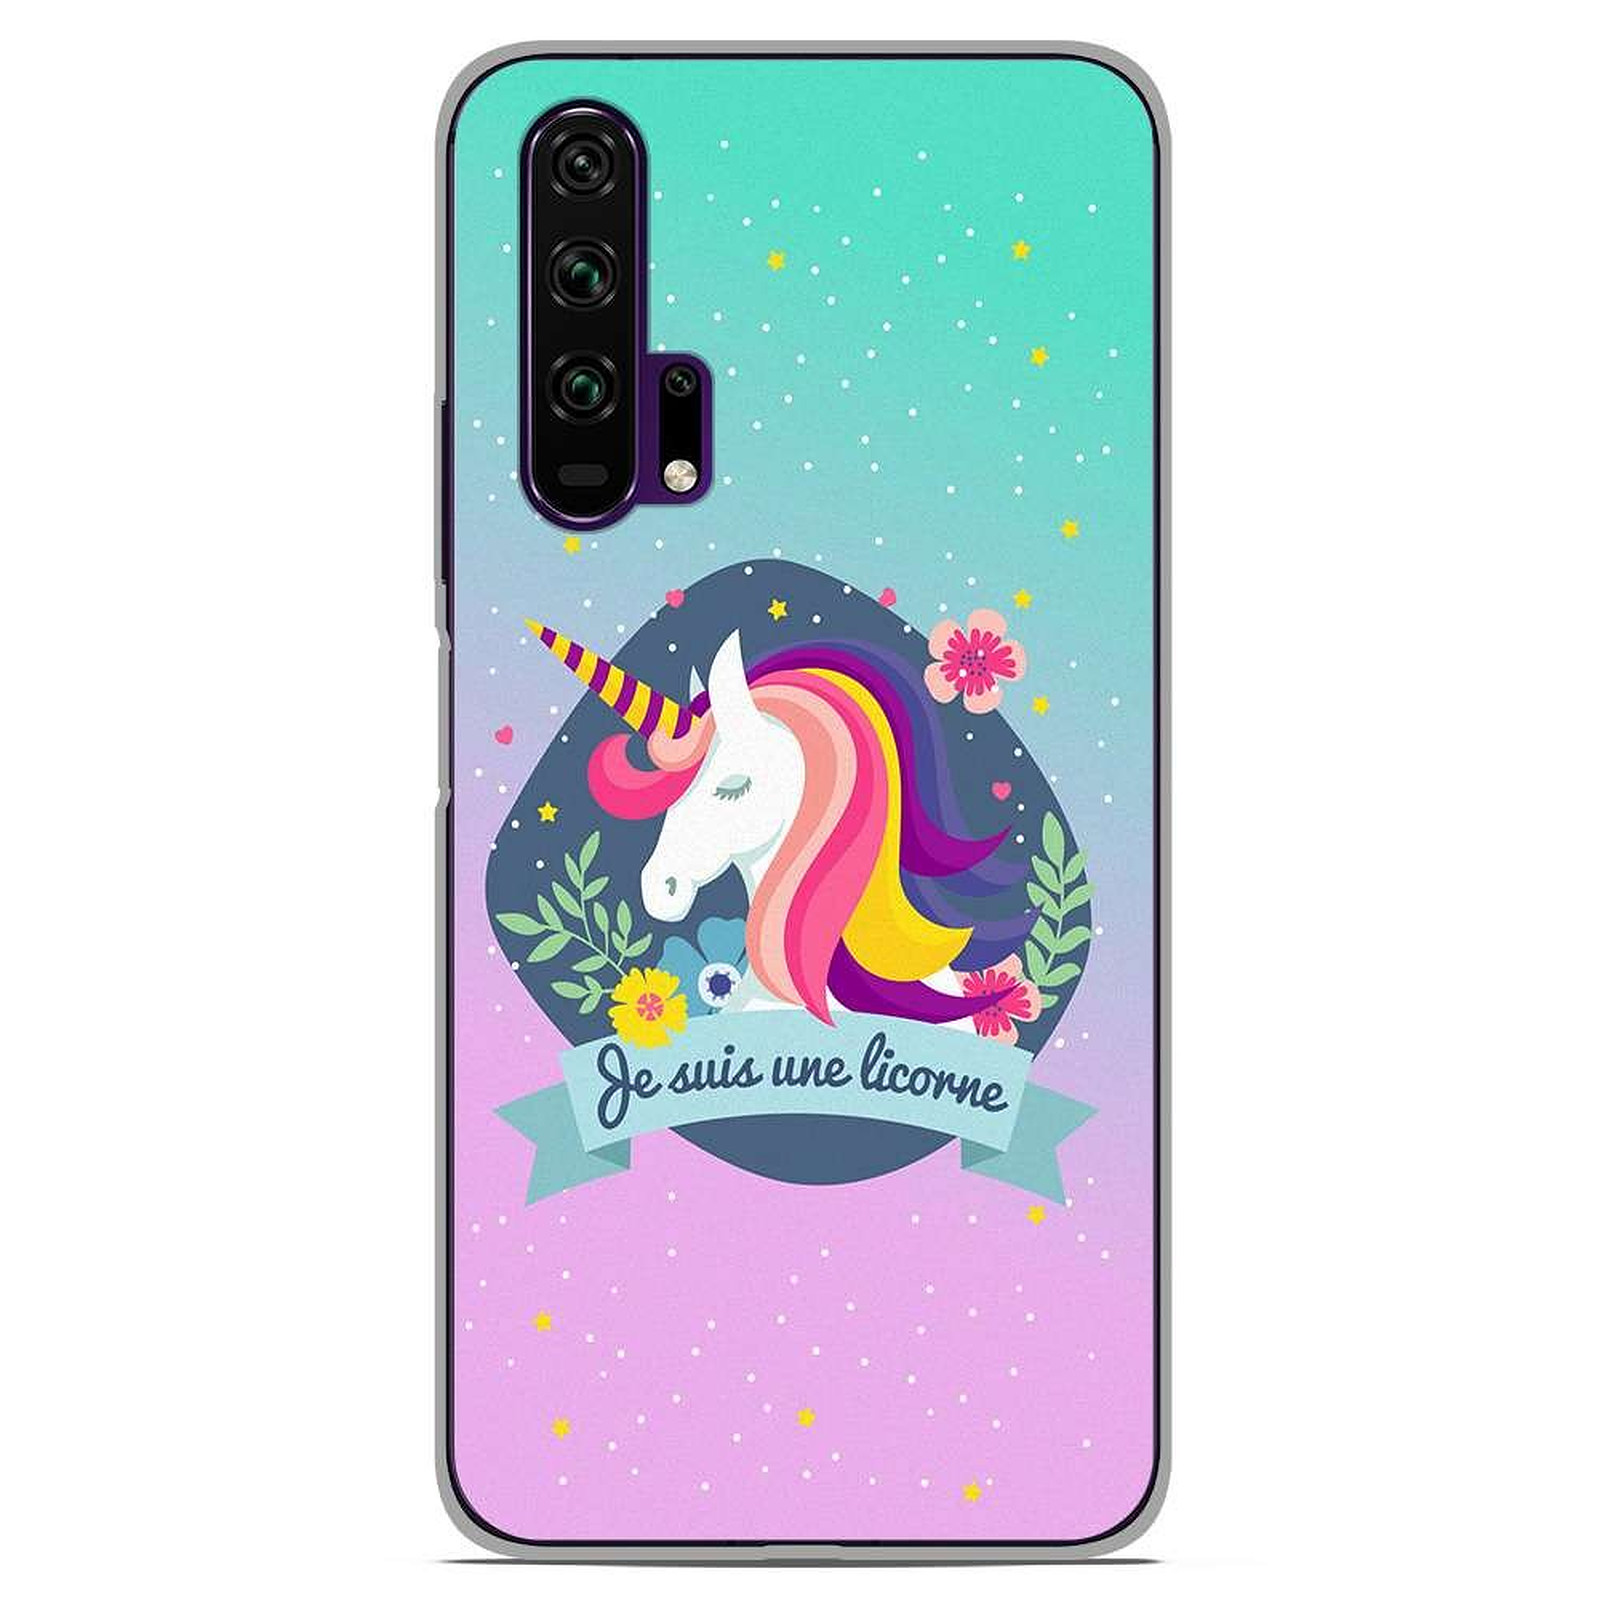 1001 Coques Coque silicone gel Huawei Honor 20 Pro motif Je suis une licorne - Coque telephone 1001Coques